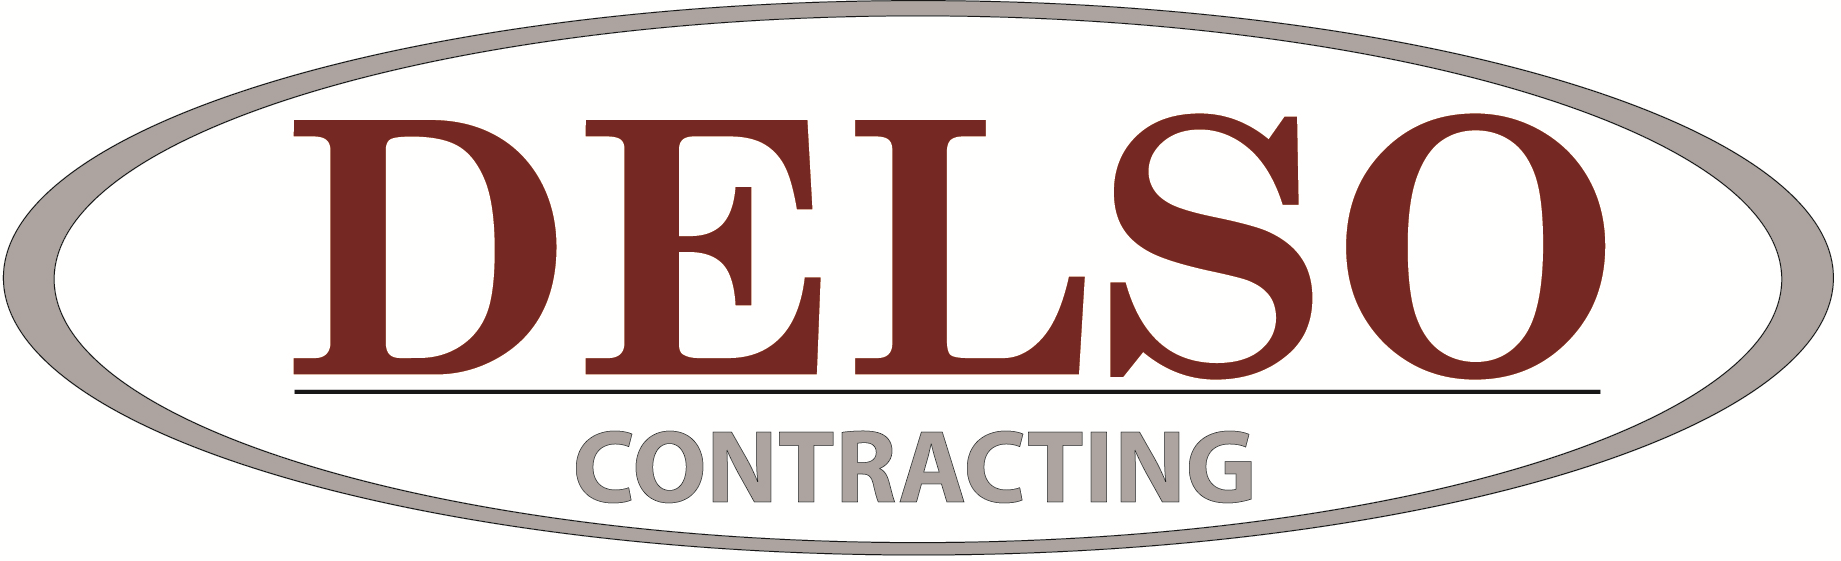 Delso Contracting Logo